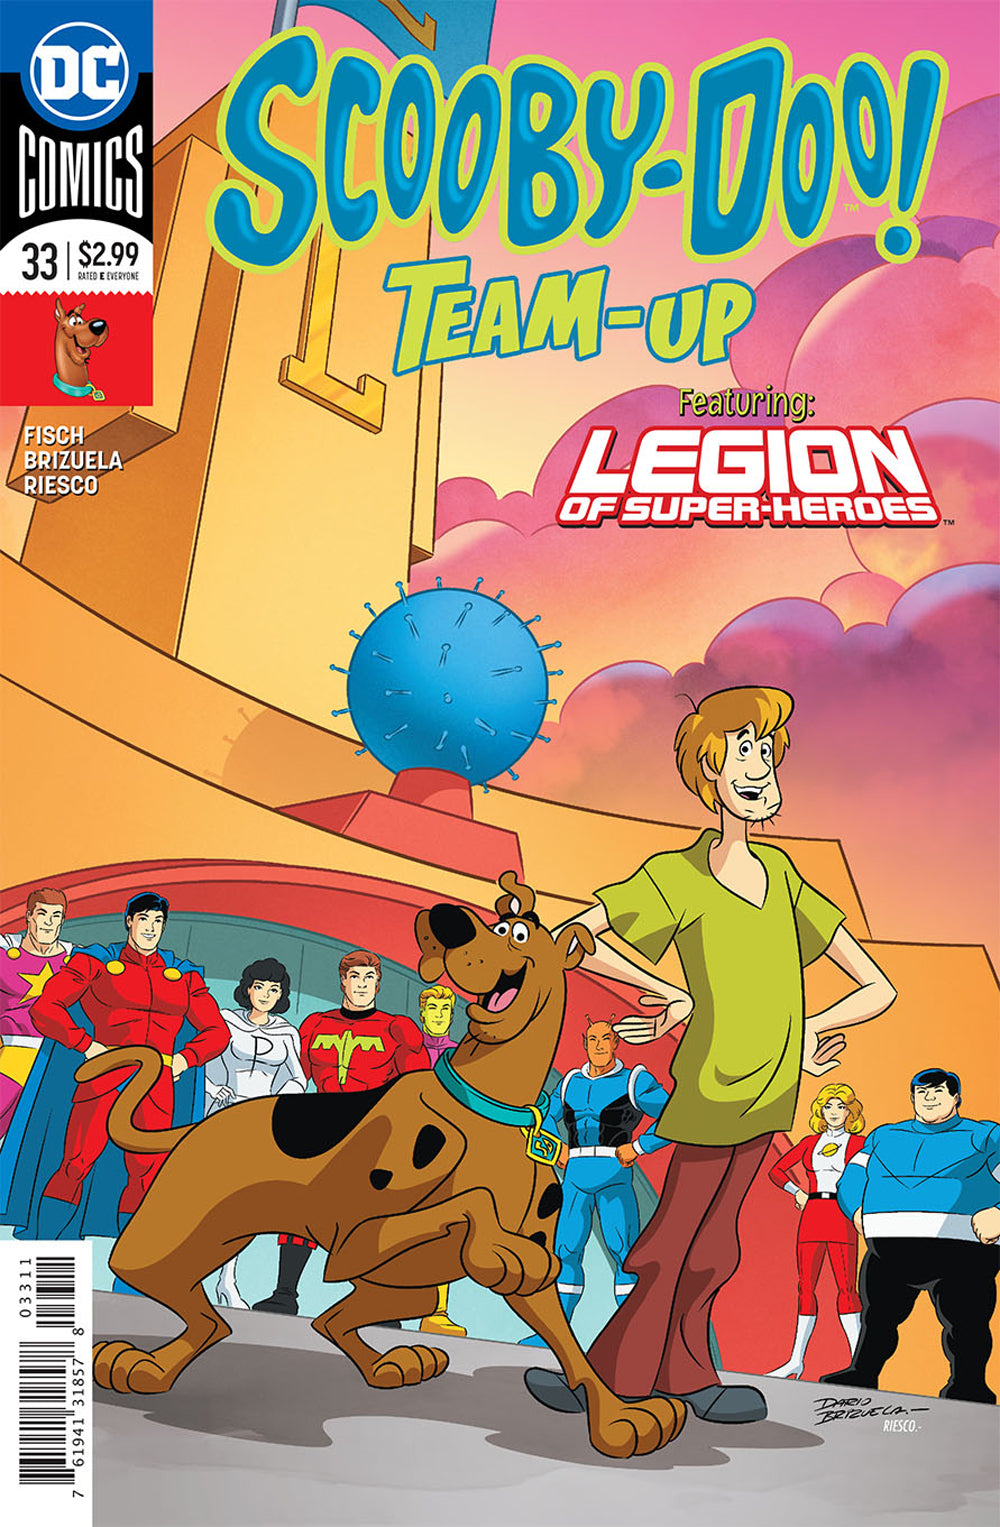 SCOOBY DOO TEAM UP #33 | Game Master's Emporium (The New GME)